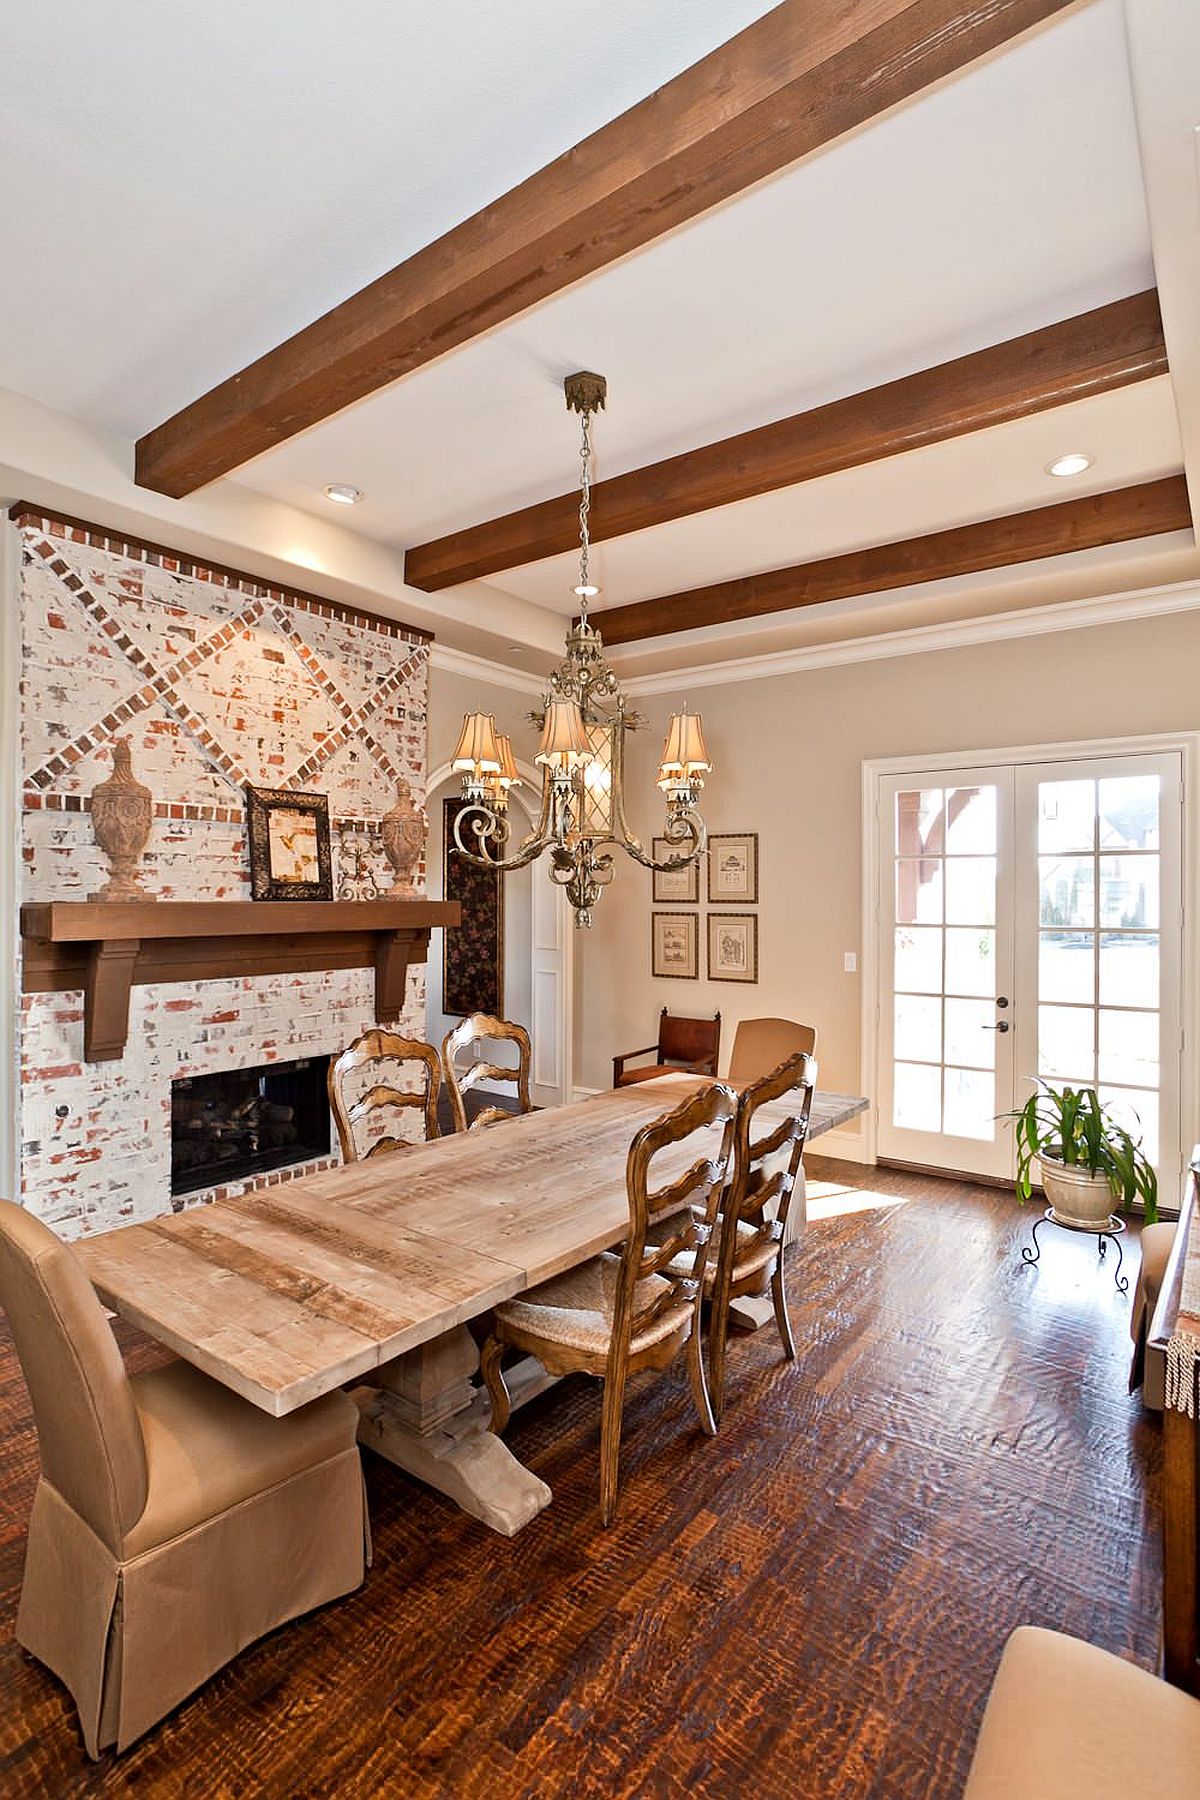 Weathered-brick-wall-backdrop-in-the-dining-room-gives-it-a-timeless-look-19417